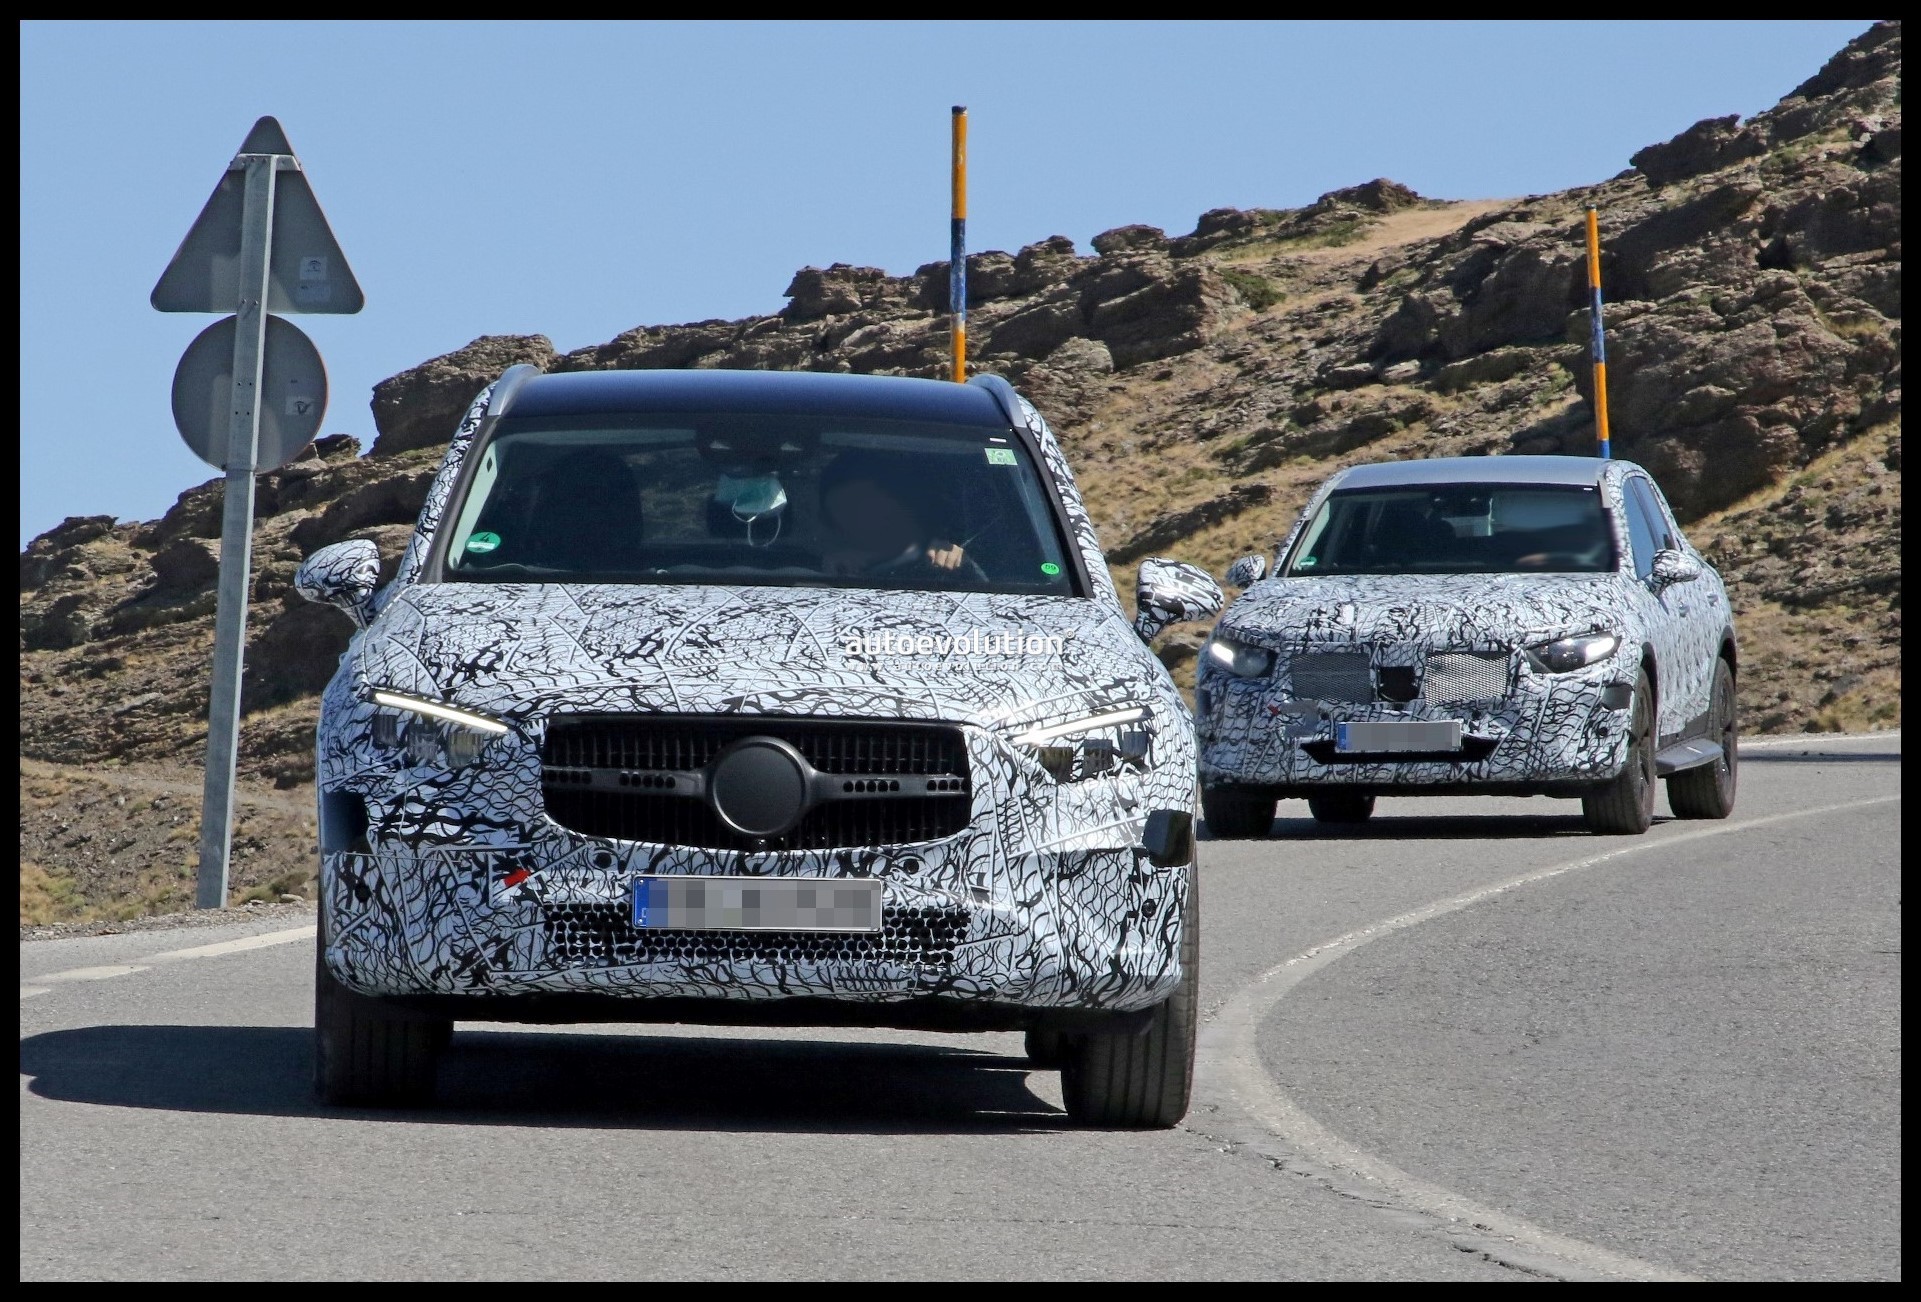 20 photos to decide if the X254 2023 Mercedes-Benz GLC is worth waiting for